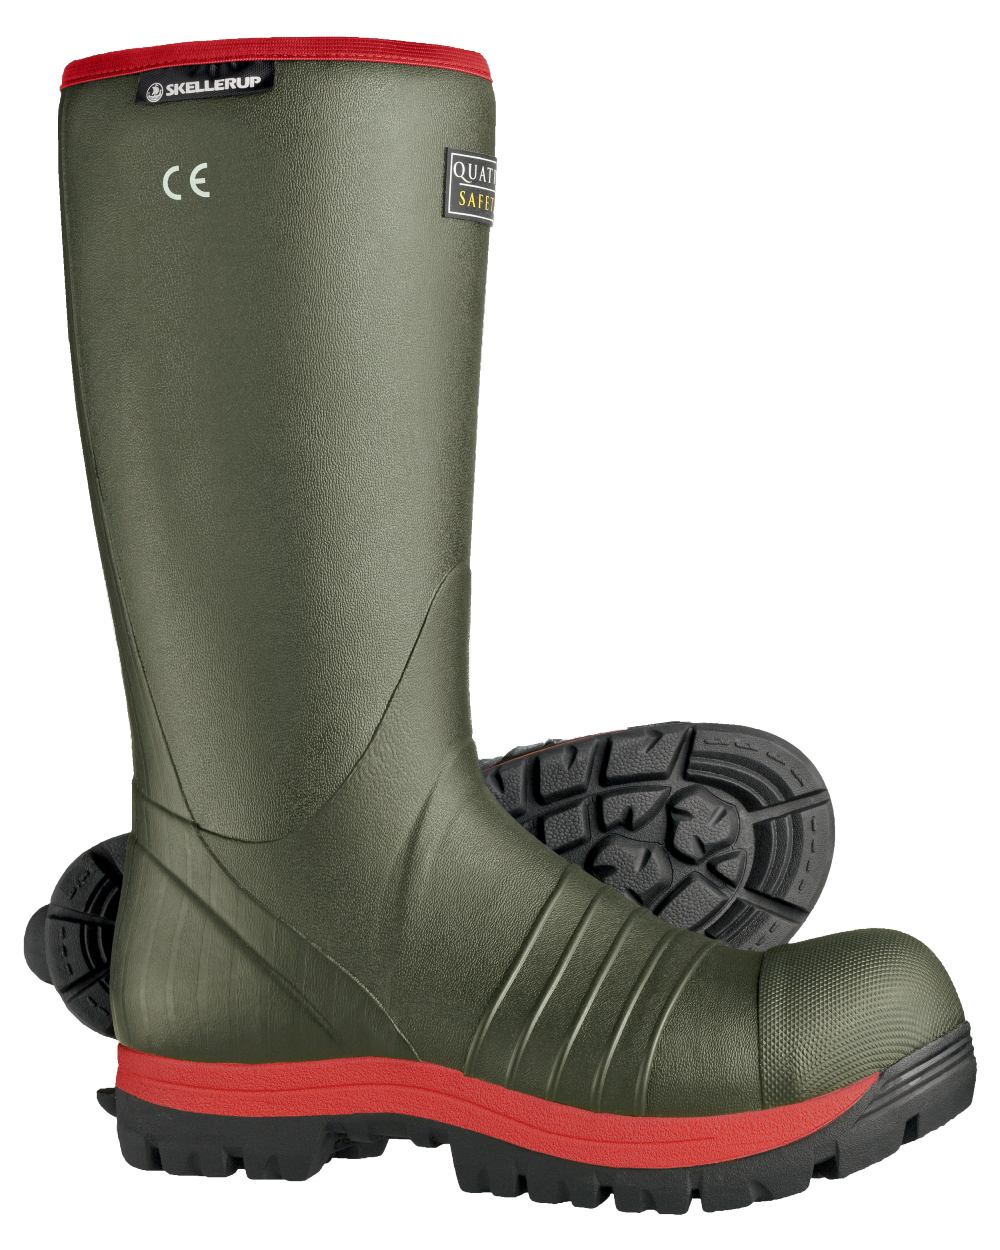 Green Coloured Skellerup Quatro Super Safety S5 Insulated Green Boot On A White Background